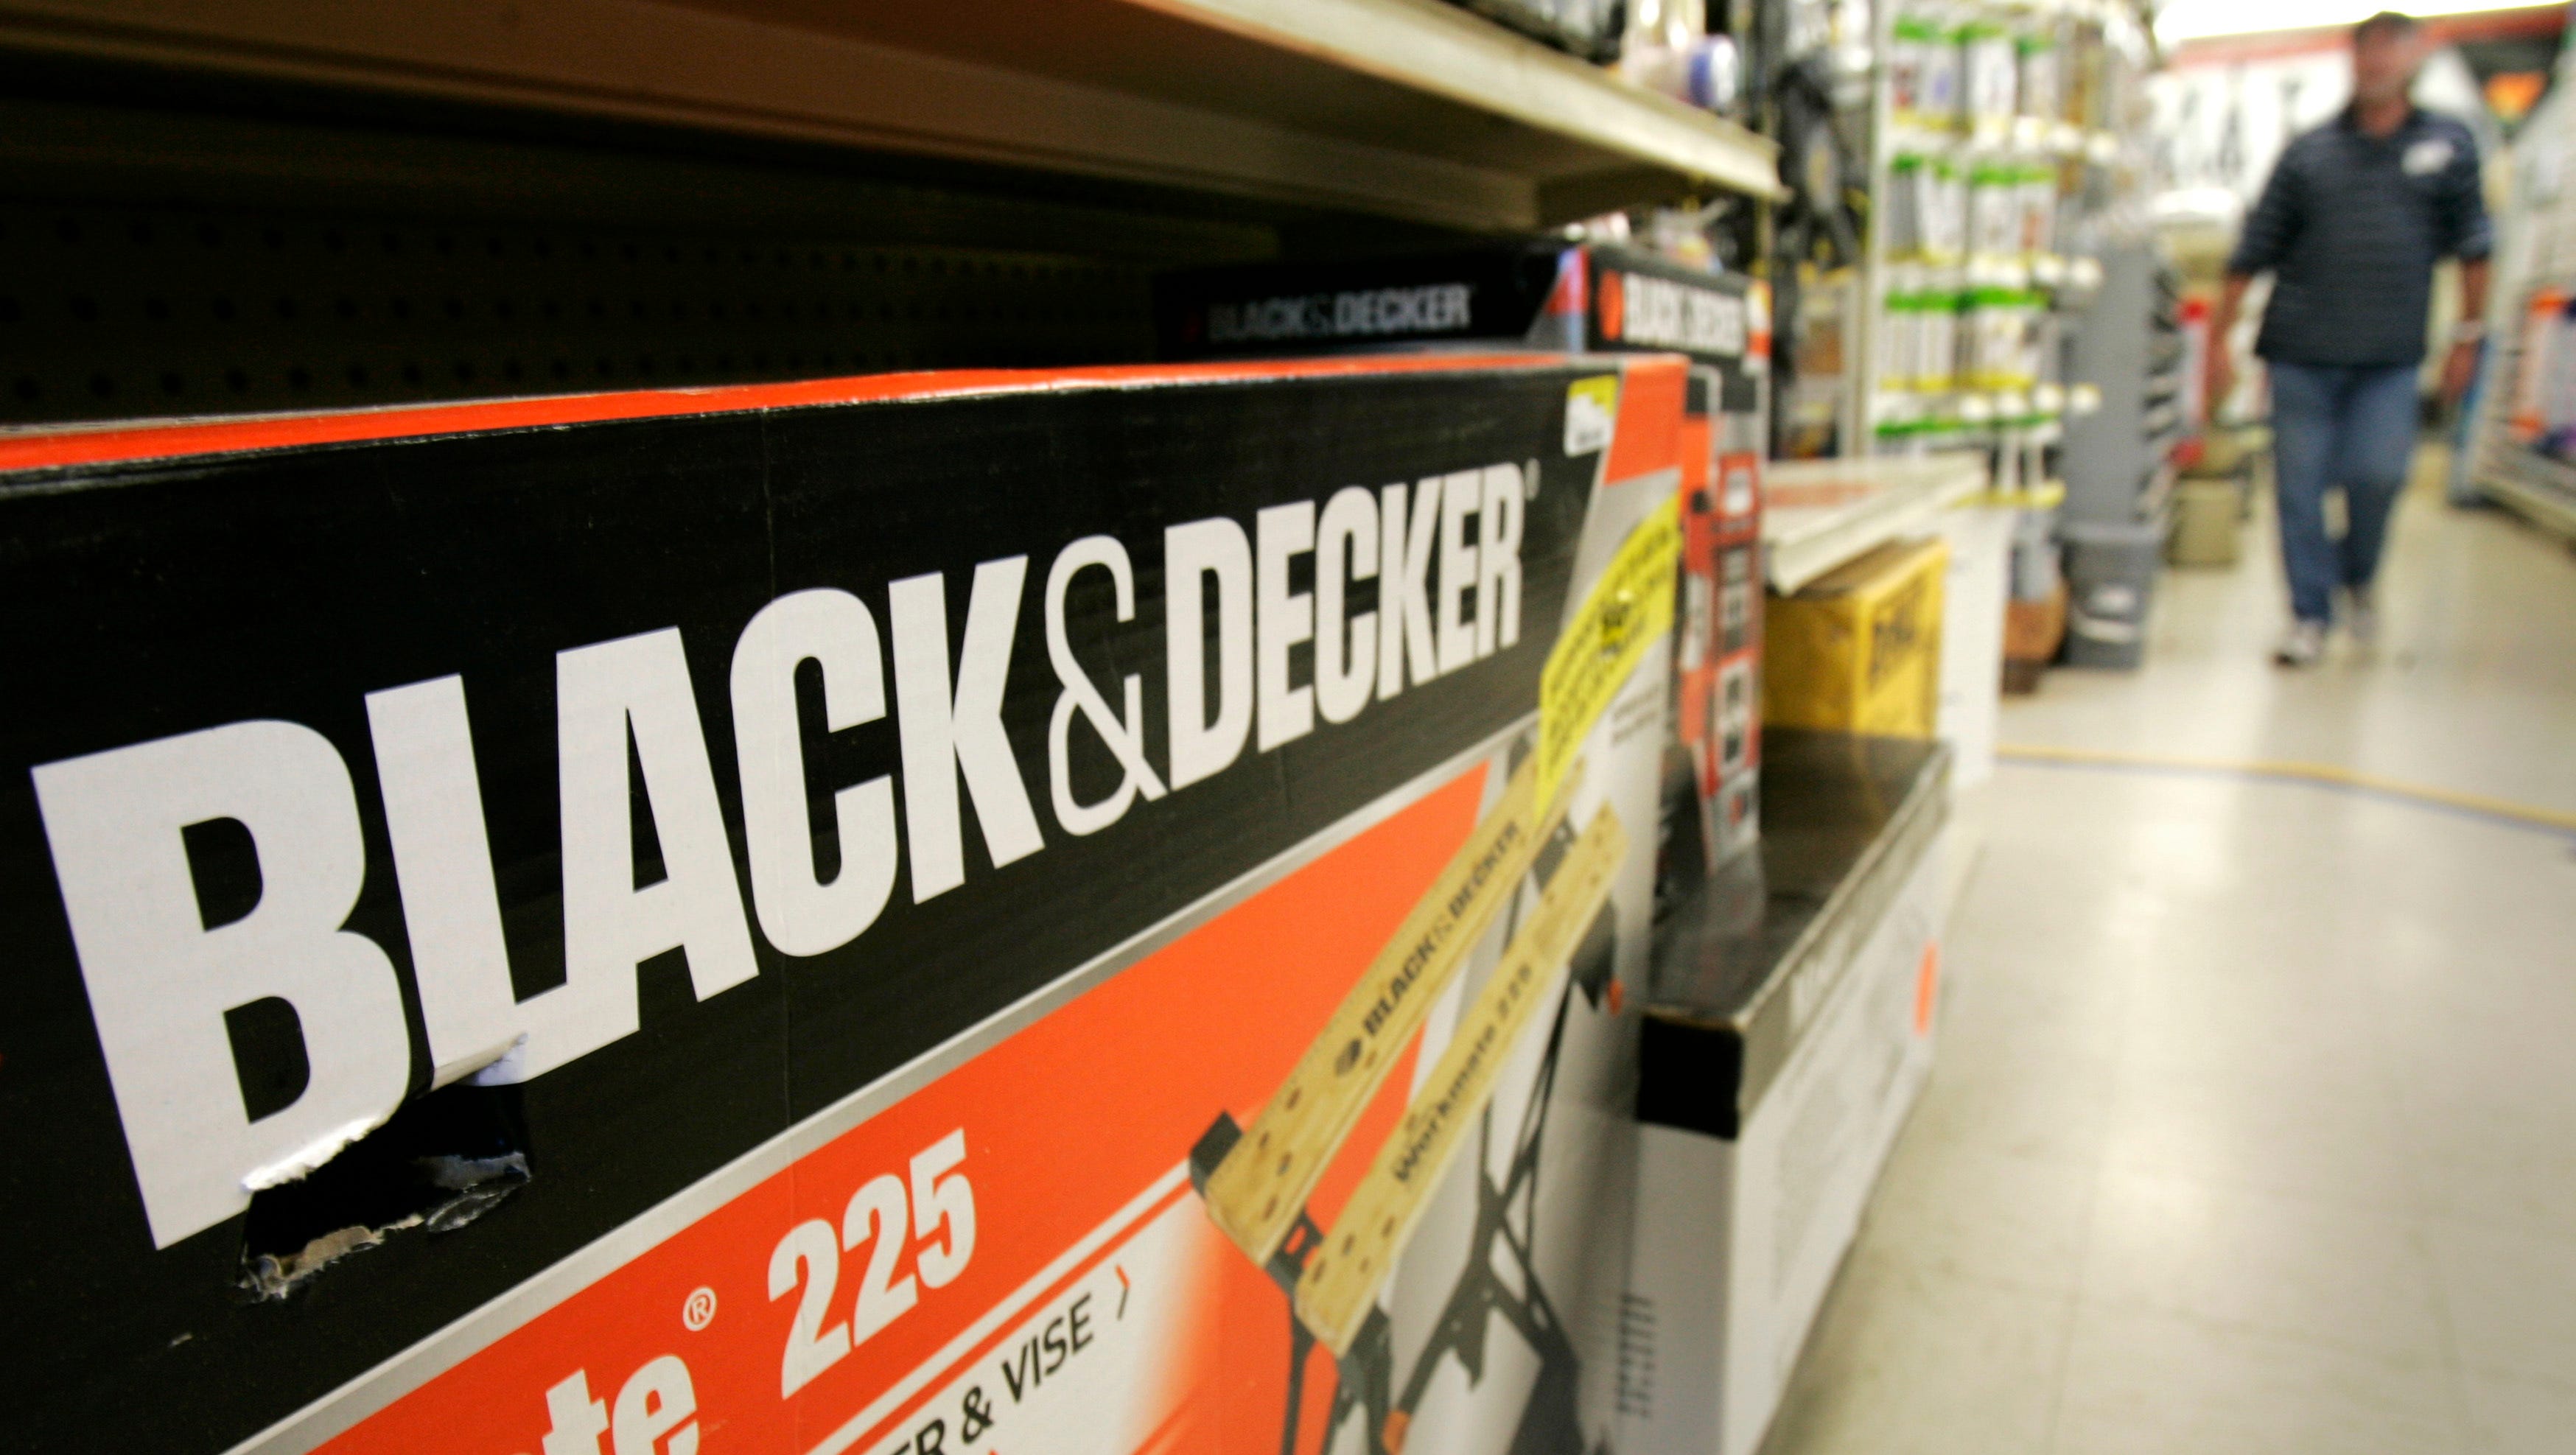 Stanley Black & Decker sees leadership change in Towson tools and storage  division - Baltimore Business Journal